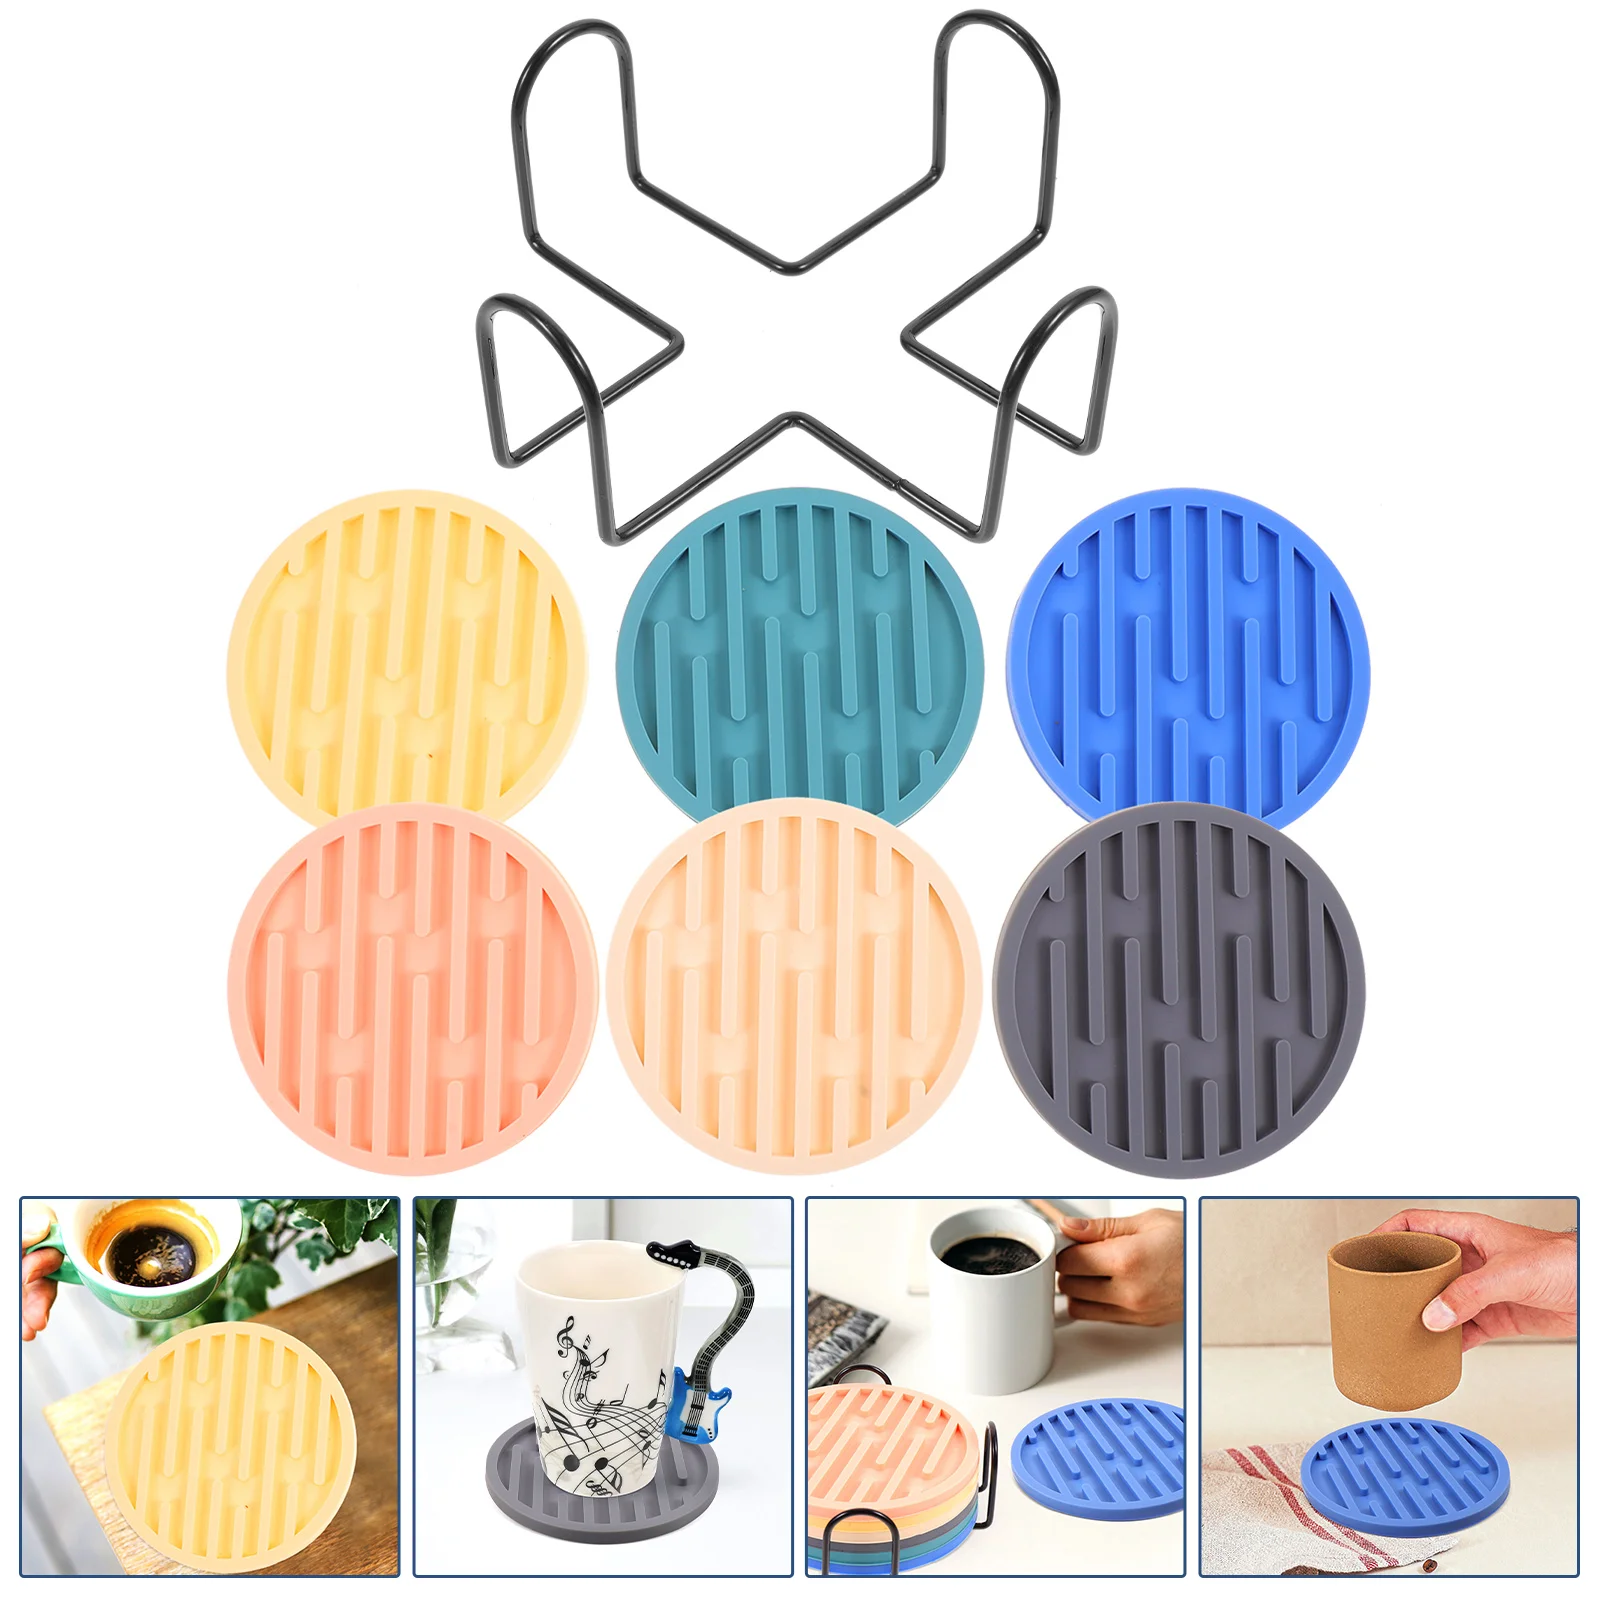 

Cup Coasters Silicone Pads Cork Mats Round Anti Mug Coffee Tumbler Mat Sliphome Bottle Drink Pad Coaster Holderdecorative Drinks